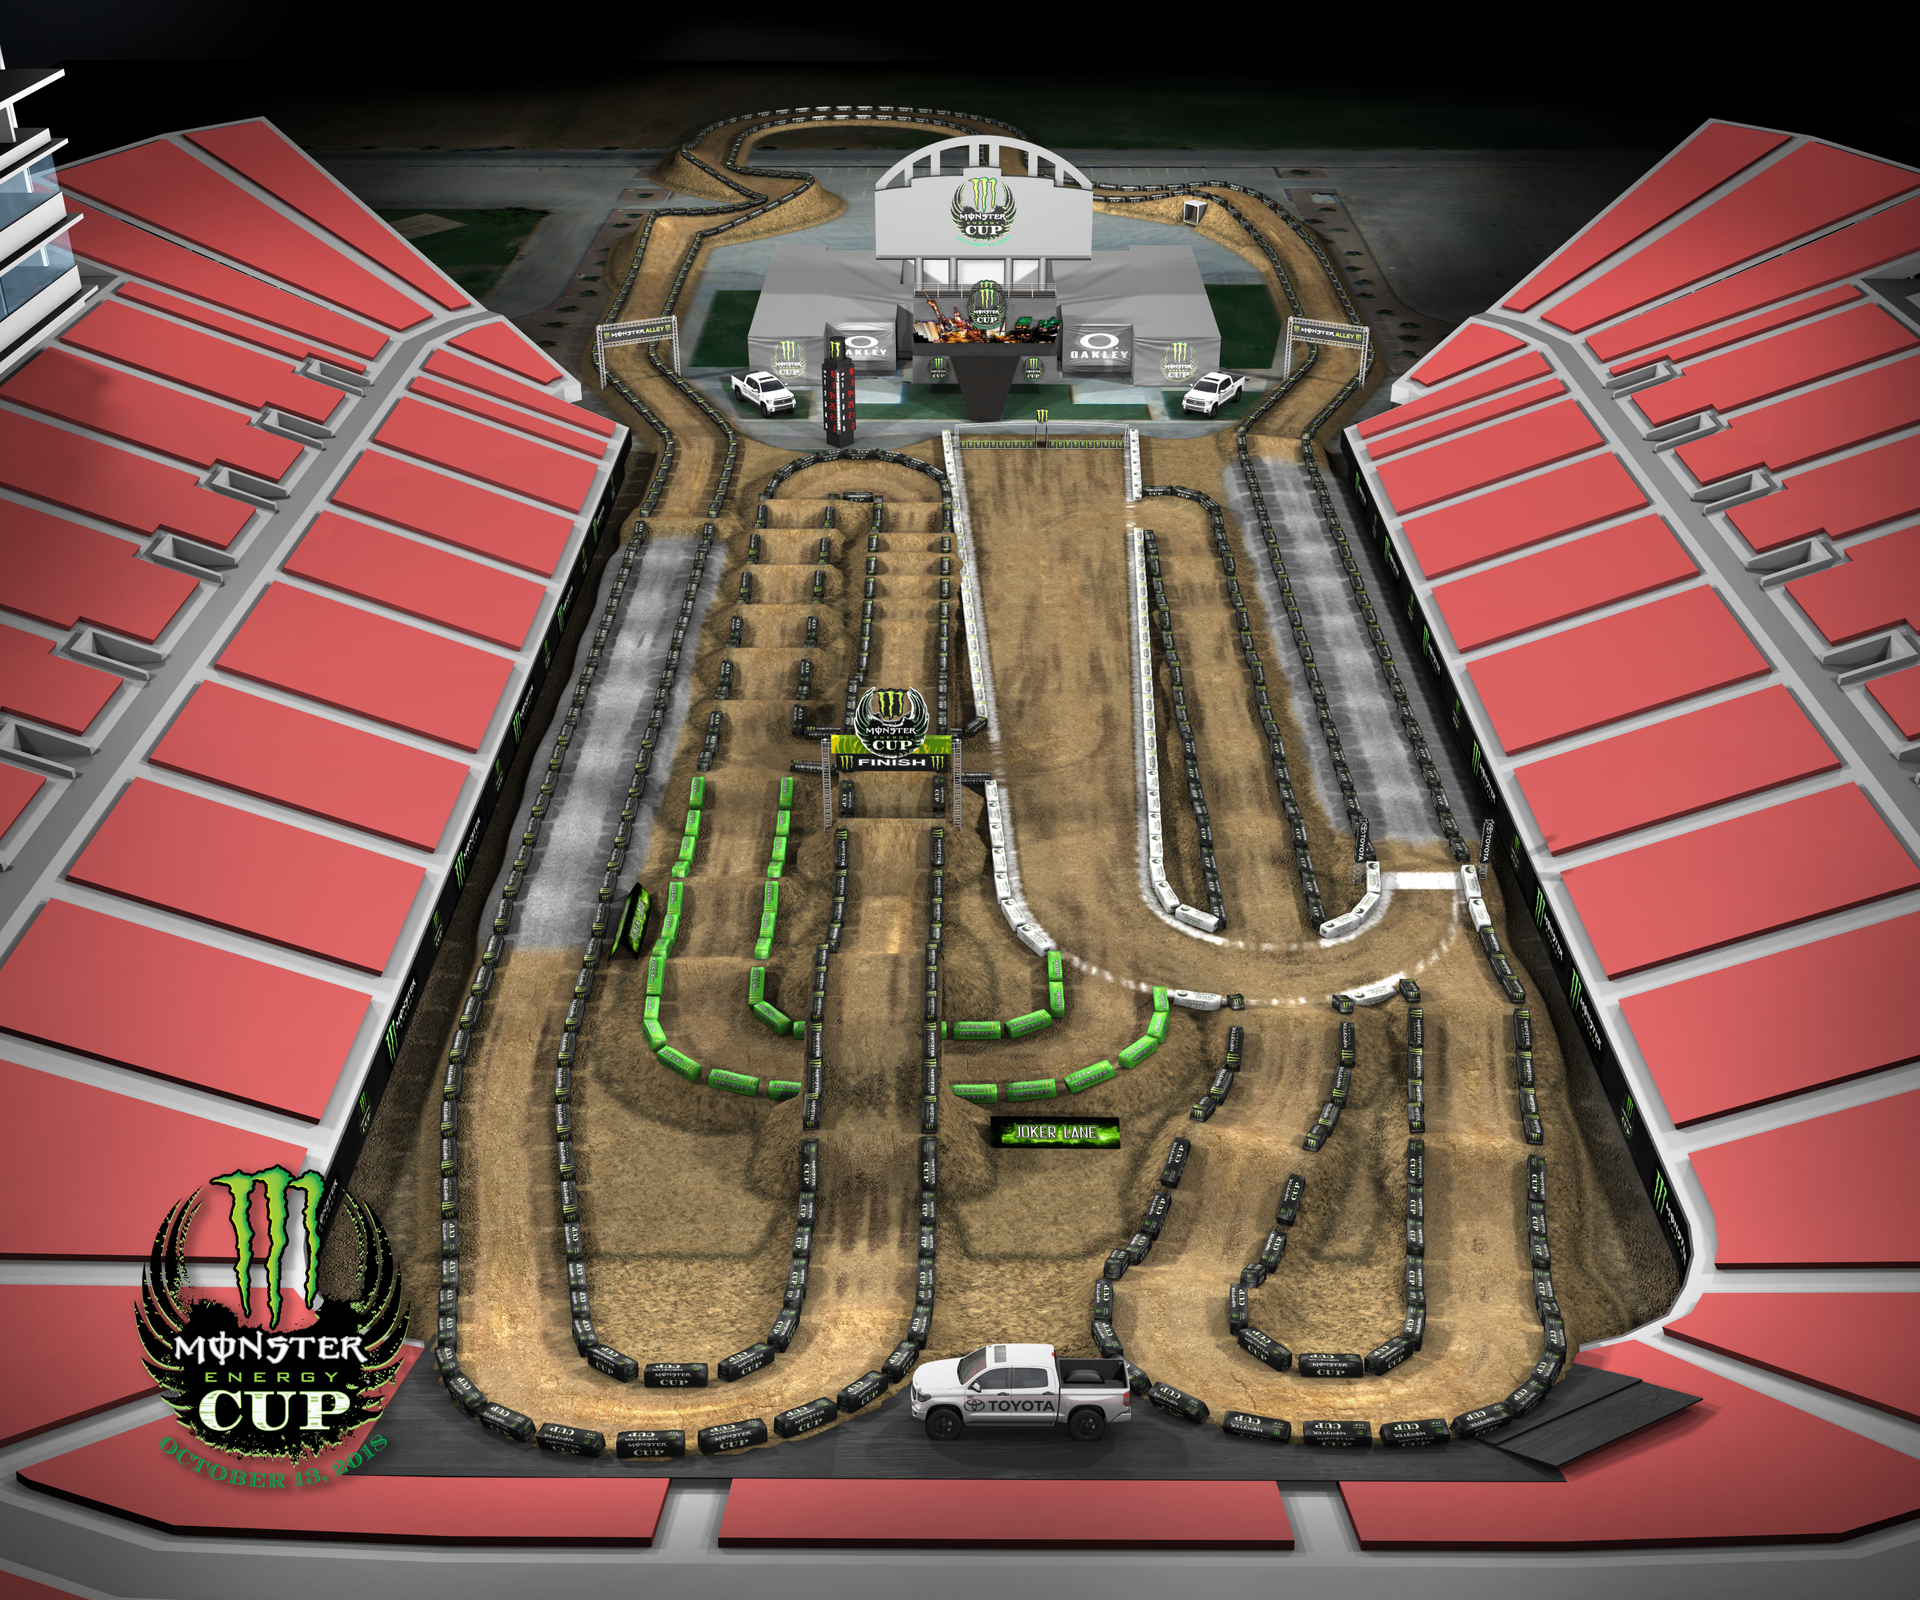 2018 Monster Energy Cup Track Map Revealed - Racer X